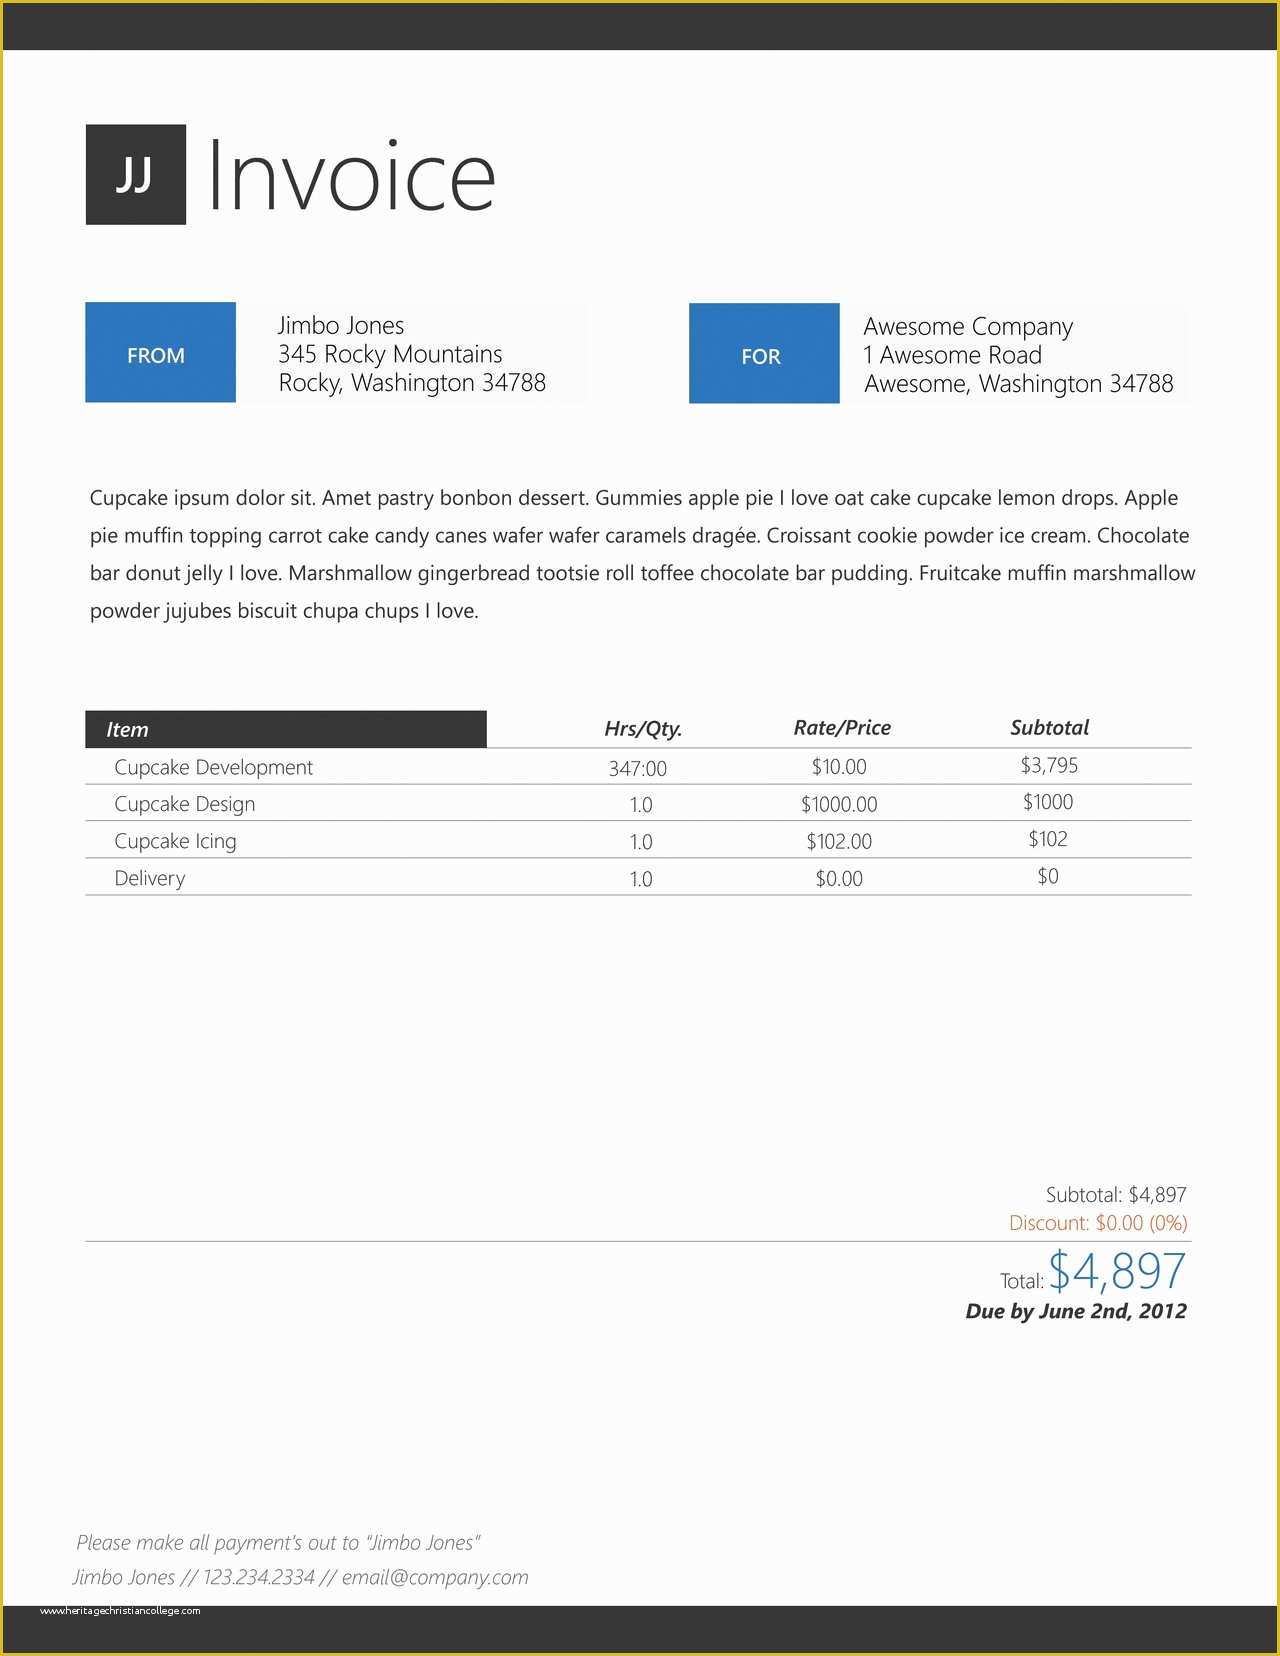 Cool Invoice Template Free Of Cool Invoice Designs Invoice Template Ideas